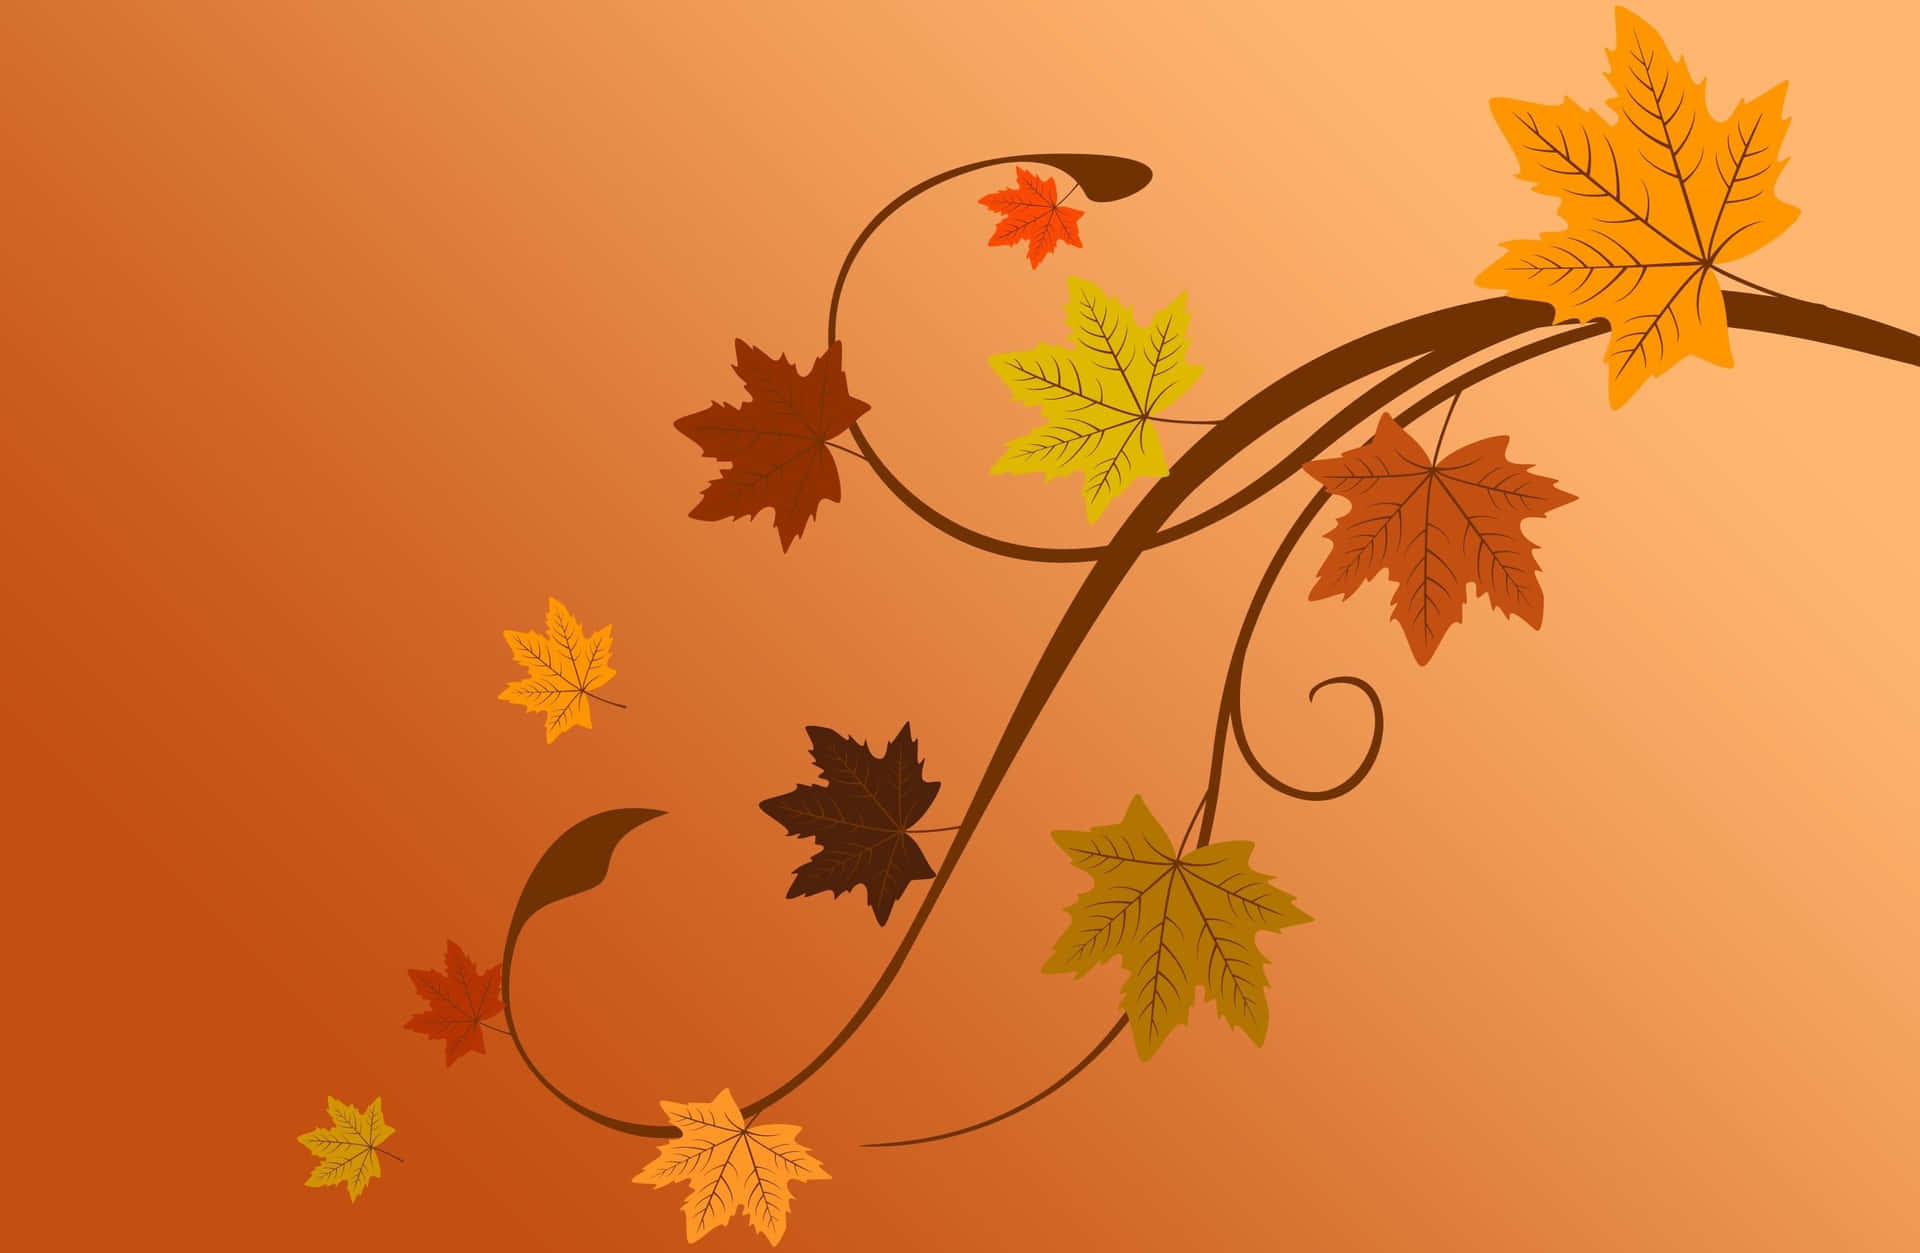 “The Colourful Palette of Fall” Wallpaper